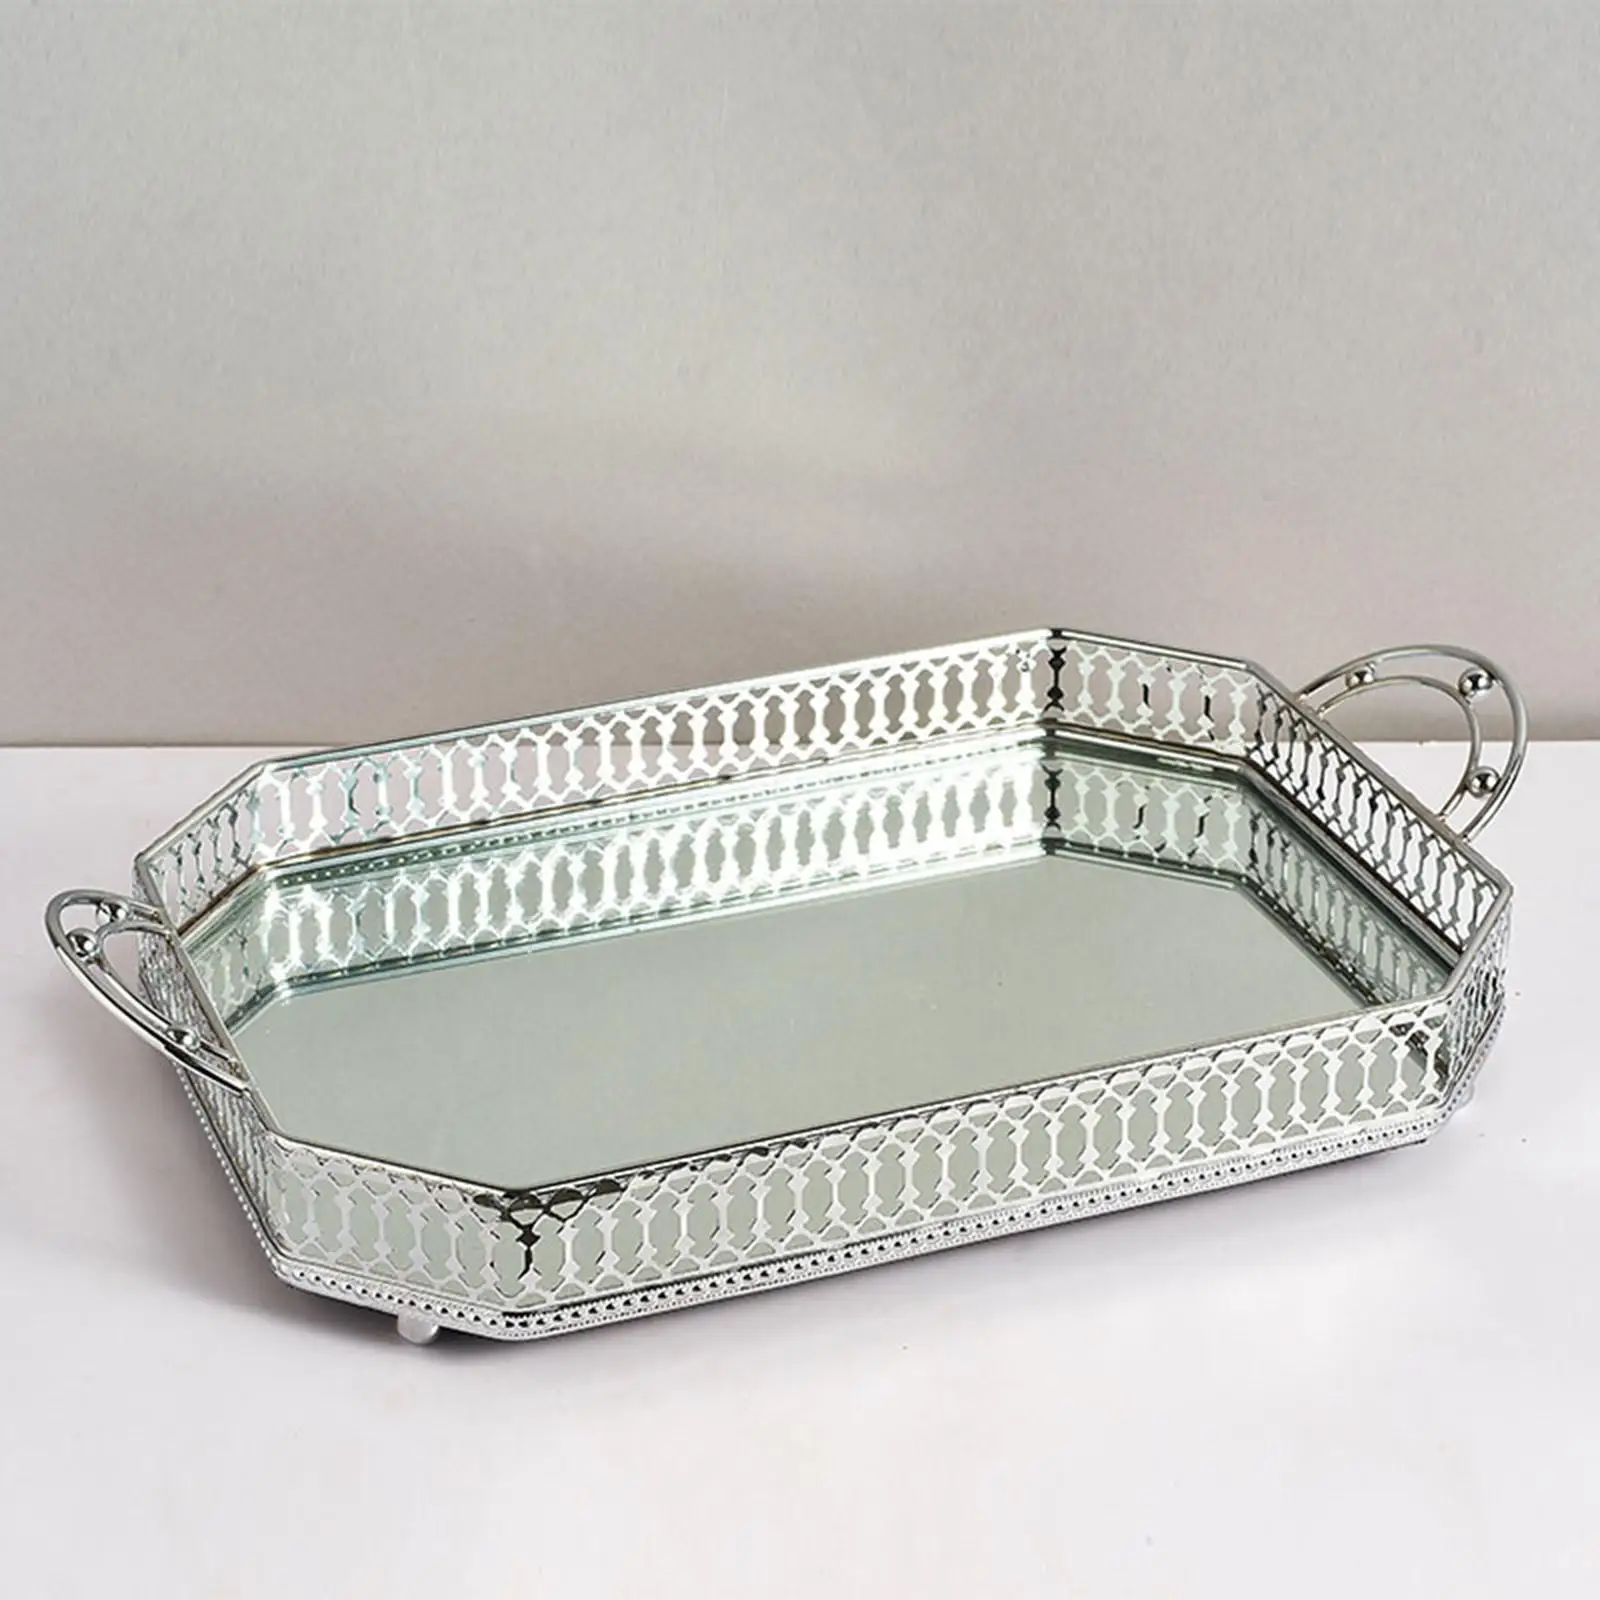 Metalmultipurpose Storage Tray Kitchen Organizer Plate Dessert Candy Dish Mirror Tray for Pantry Coffee Table Decoration